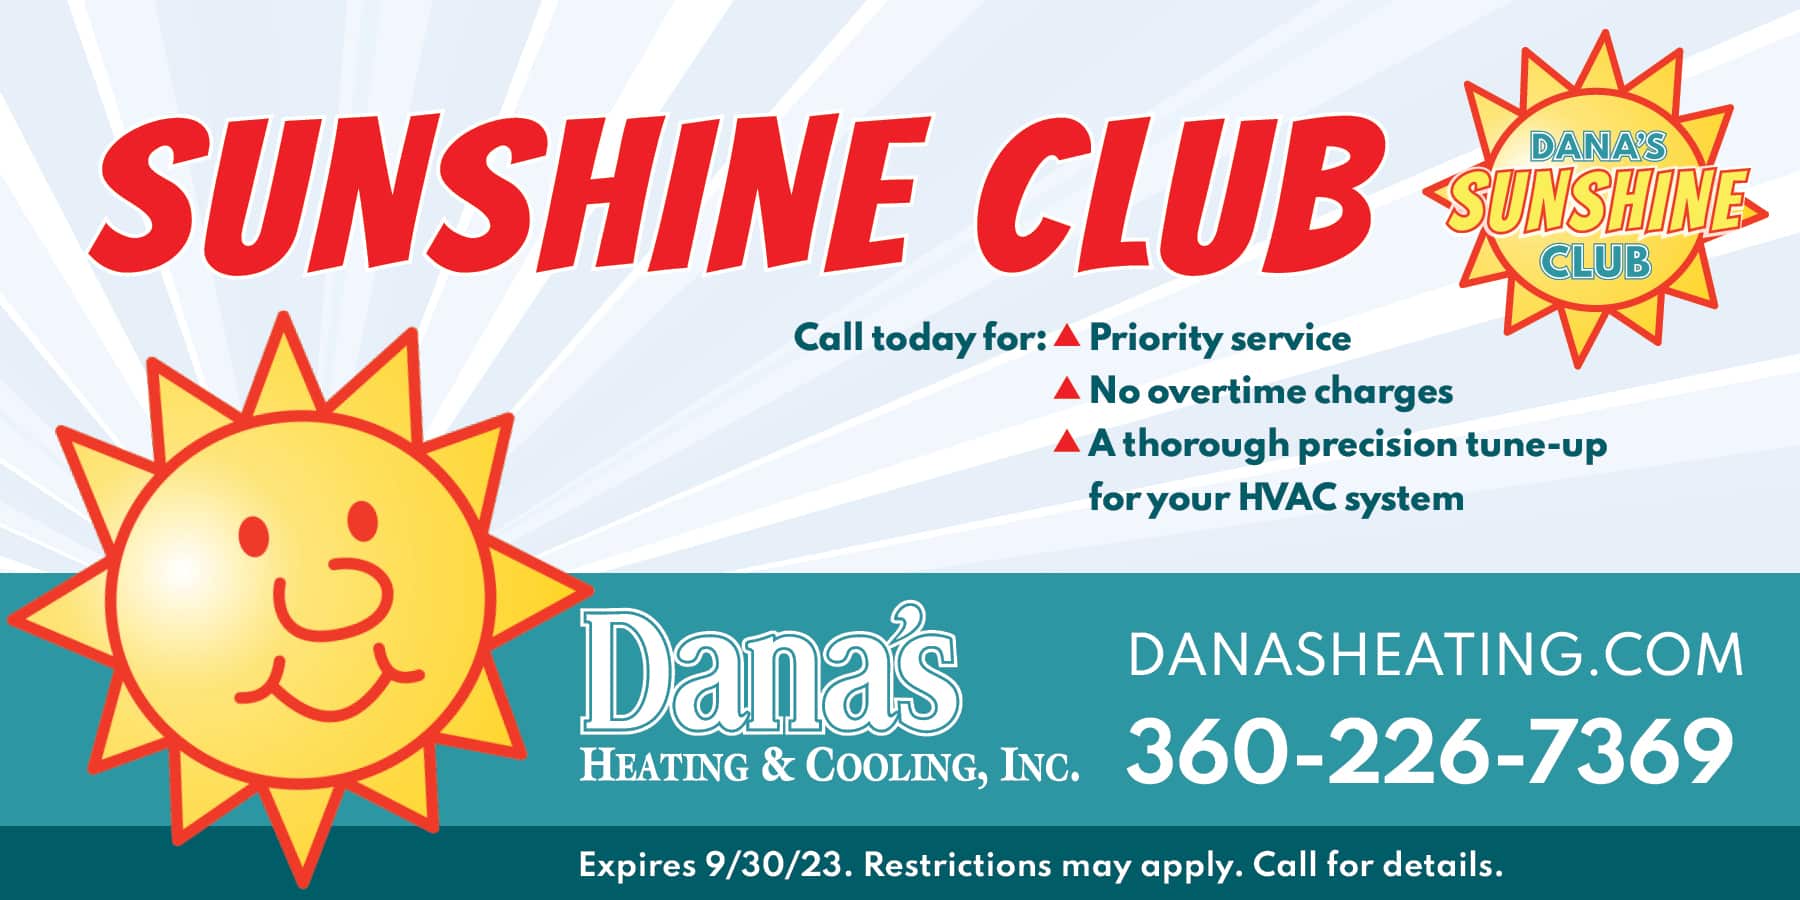 Sunshine Club. Mention that you saw this promotion on our website. Expires 9/30/23.